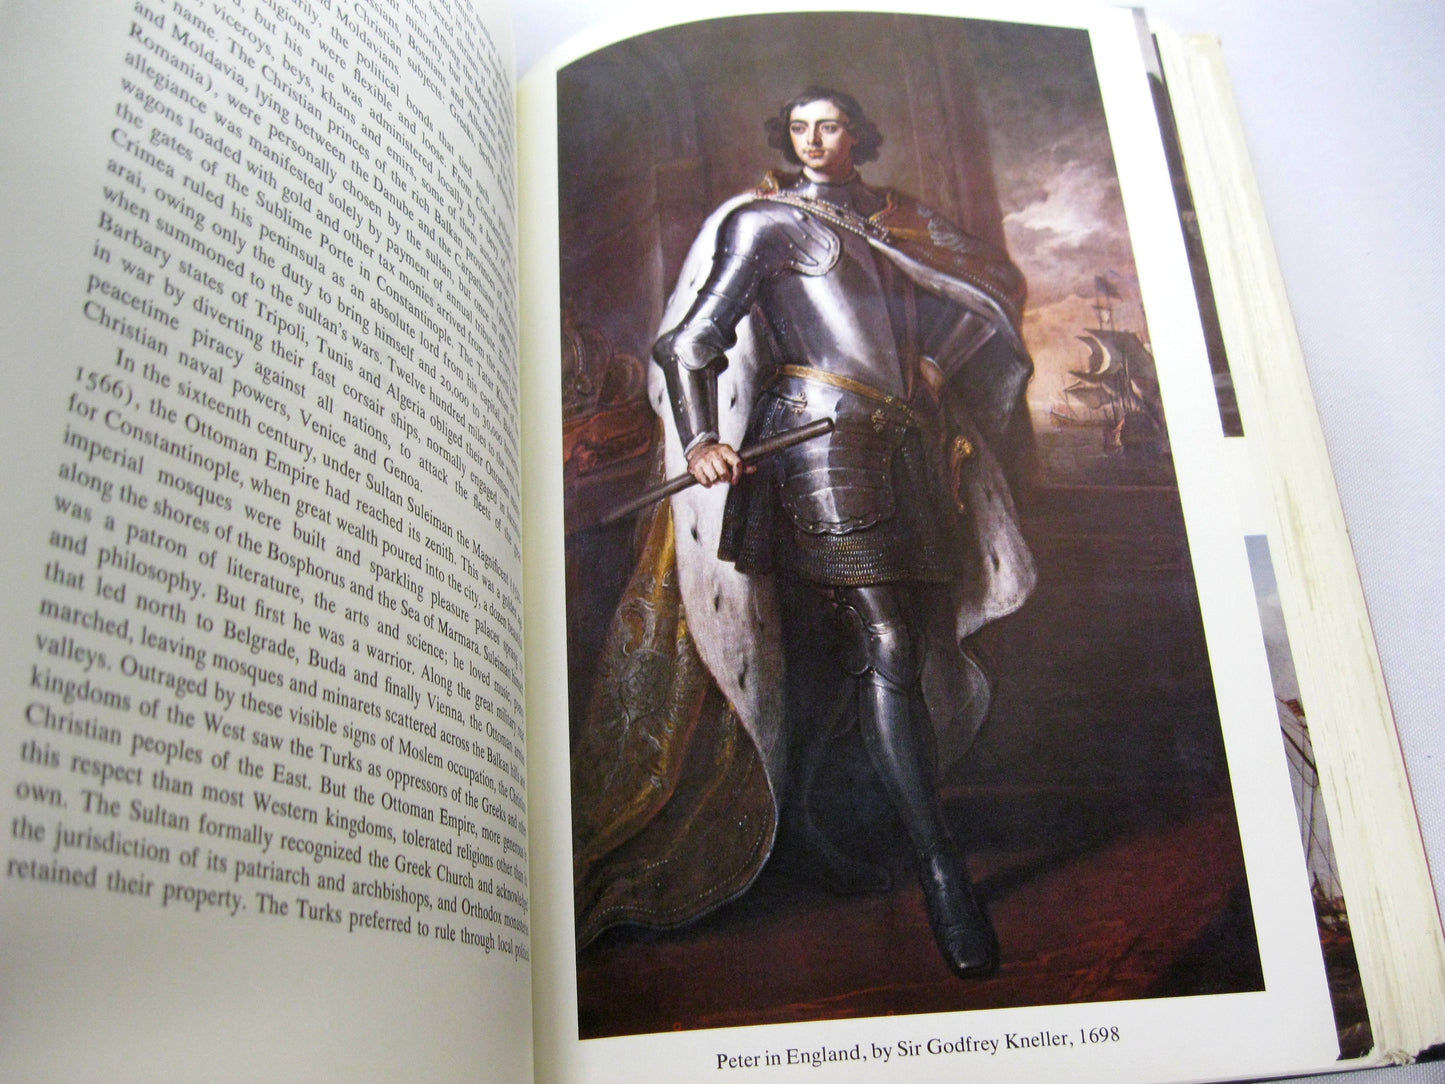 Peter the Great by Robert K. Massie